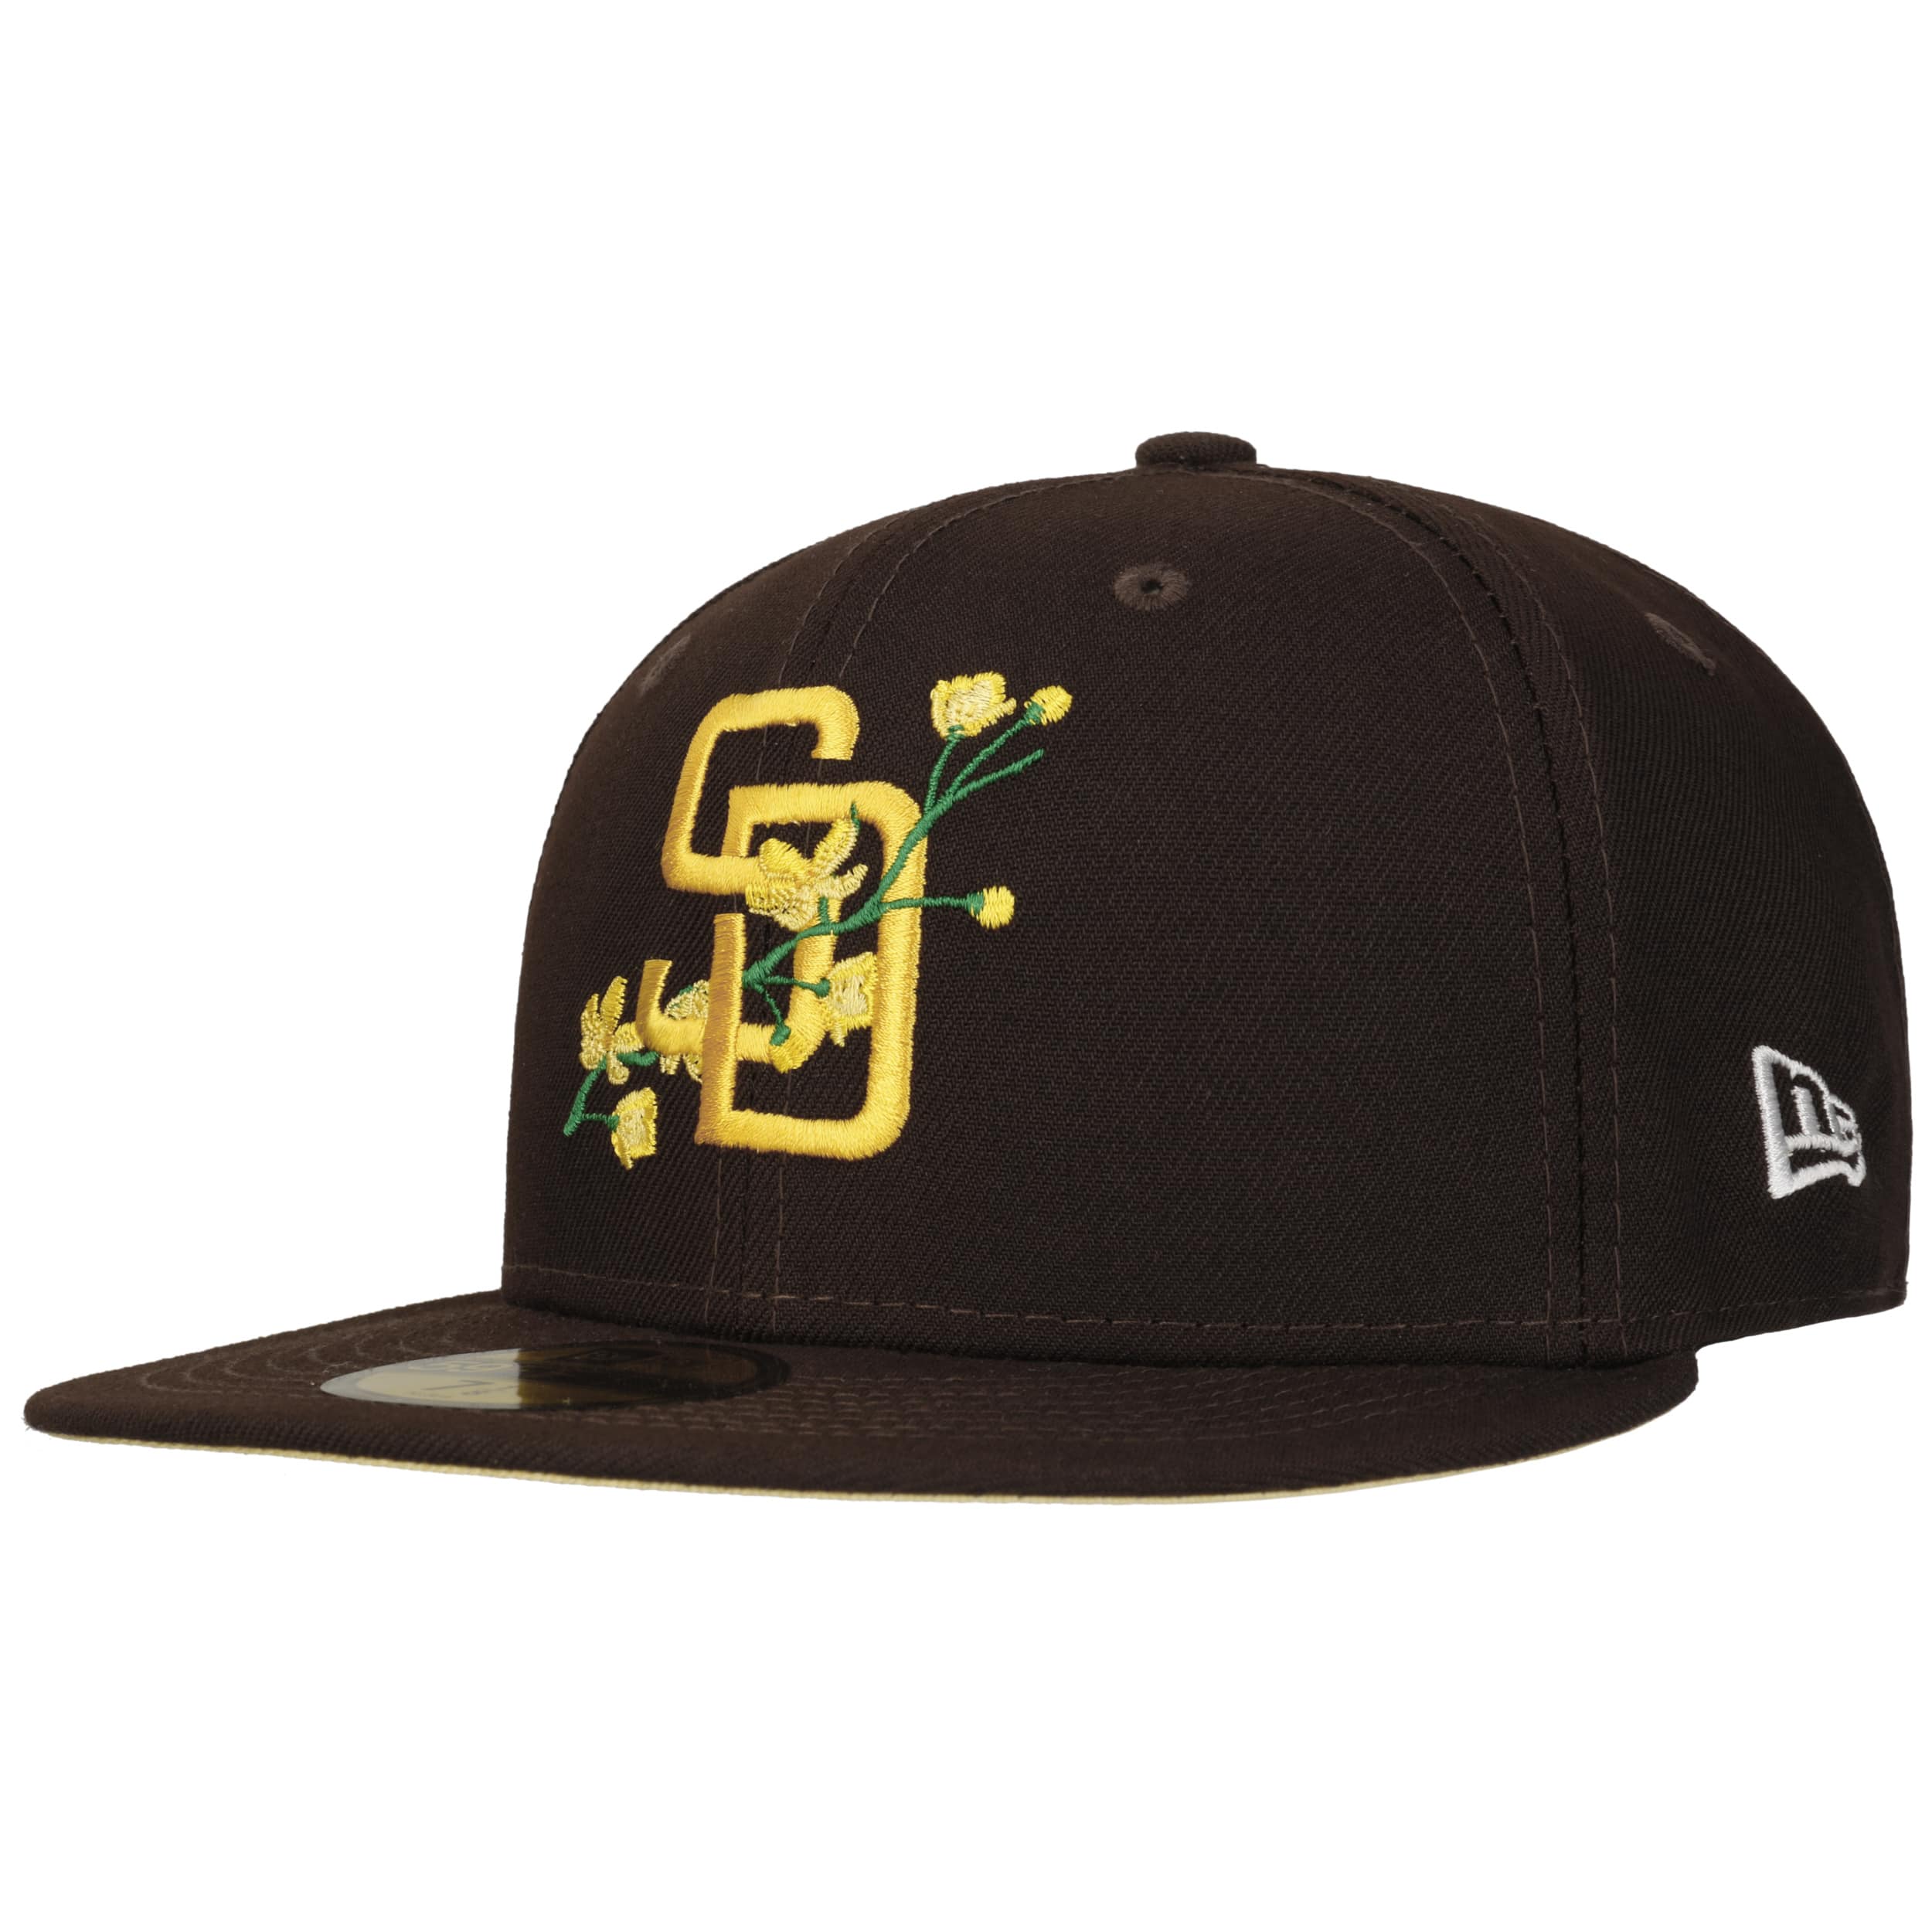 Officially Licensed League MLB San Diego Padres Men's White/Brown